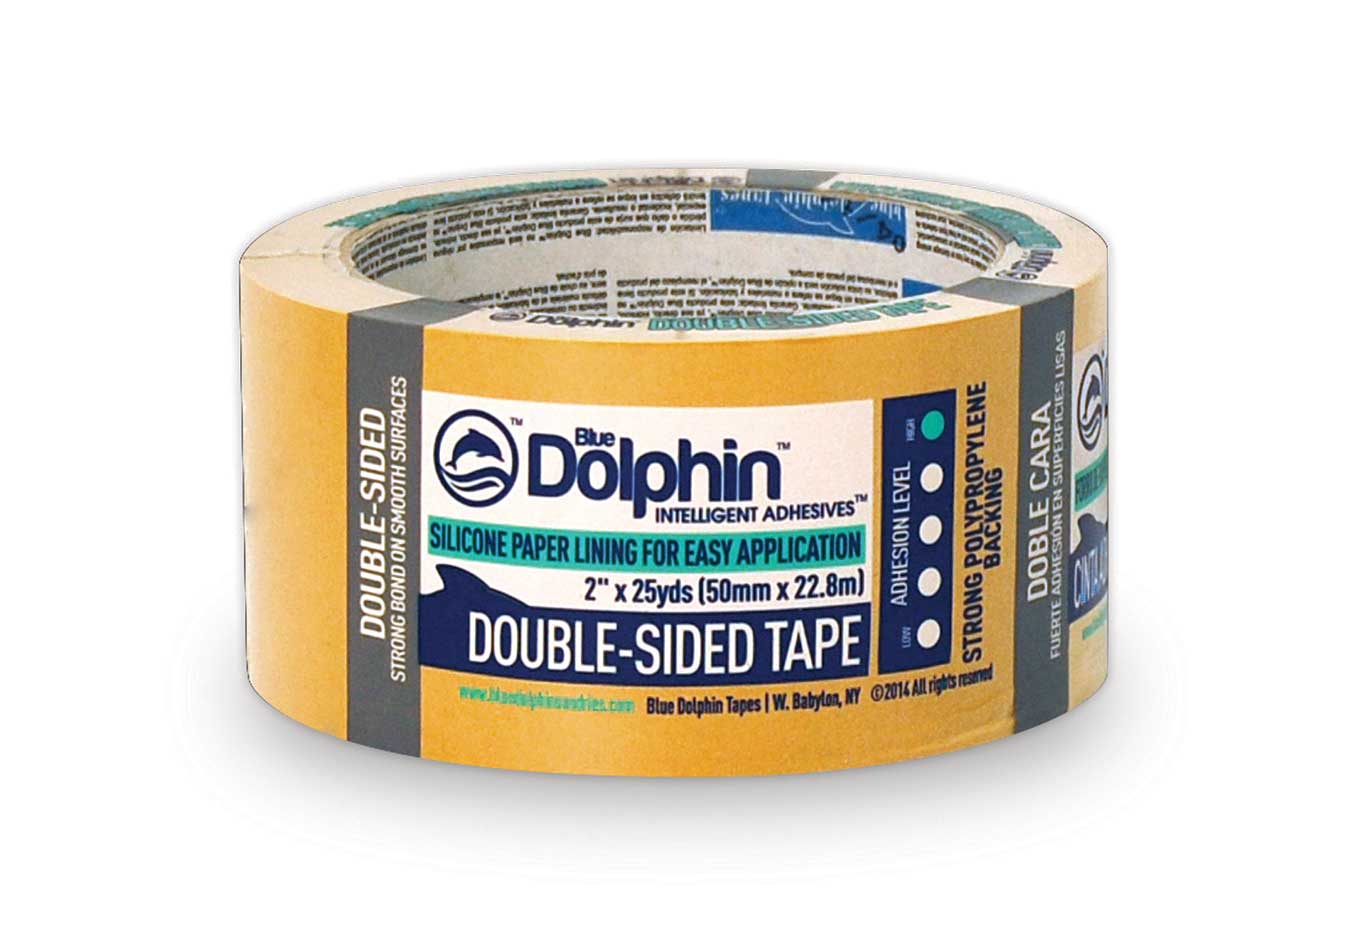 https://www.dolphinsundries.com/wp-content/uploads/2021/04/double-sided-tape.jpg